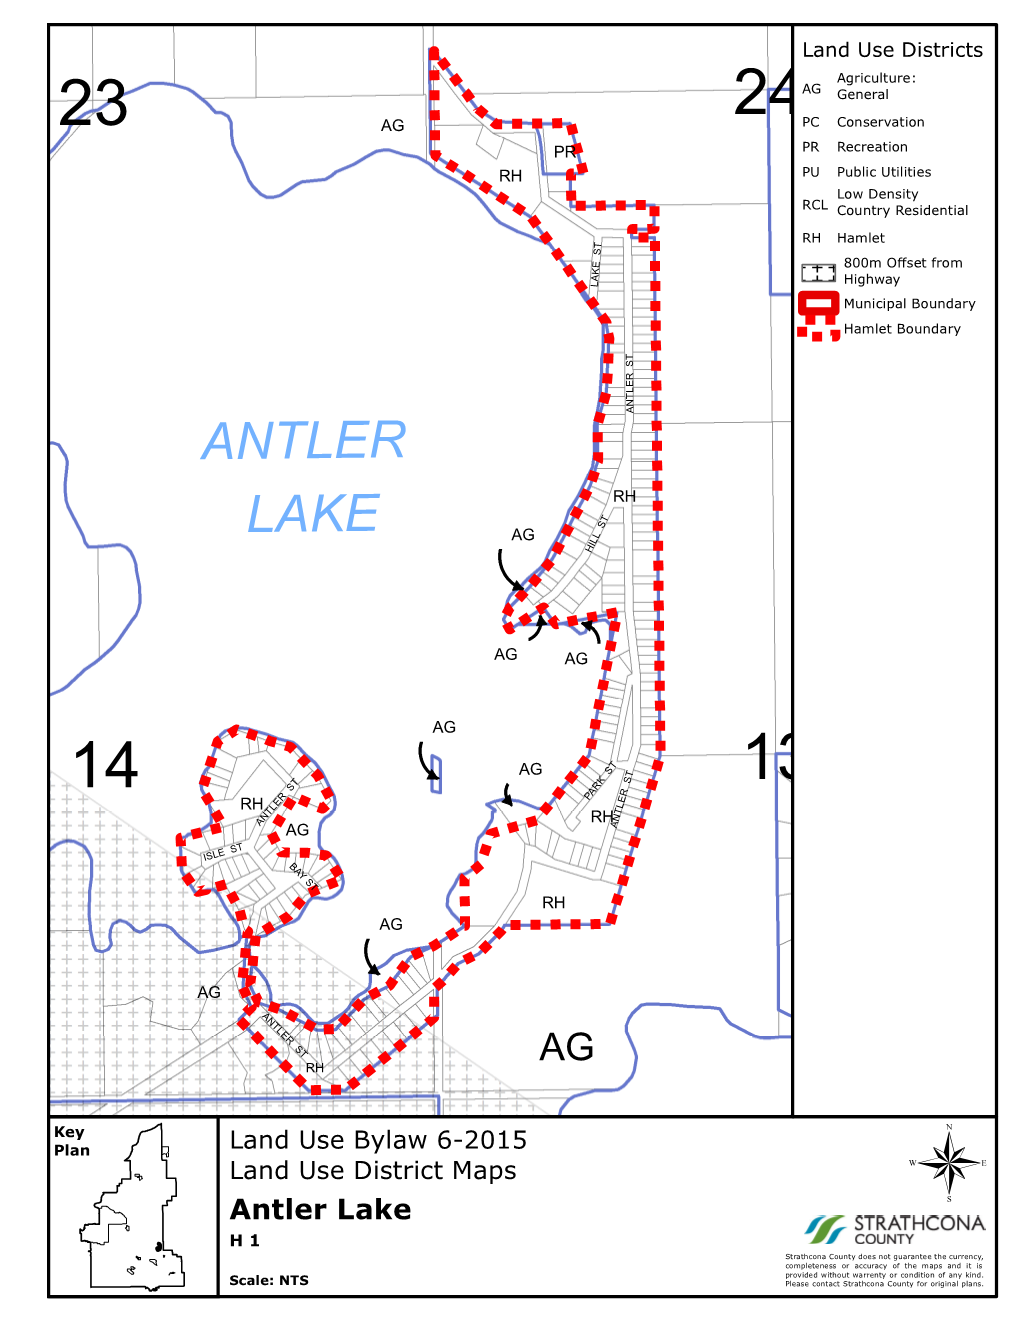 Antler Lake H 1 Strathcona County Does Not Guarantee the Currency, Completeness Or Accuracy of the Maps and It Is Provided Without Warrenty Or Condition of Any Kind